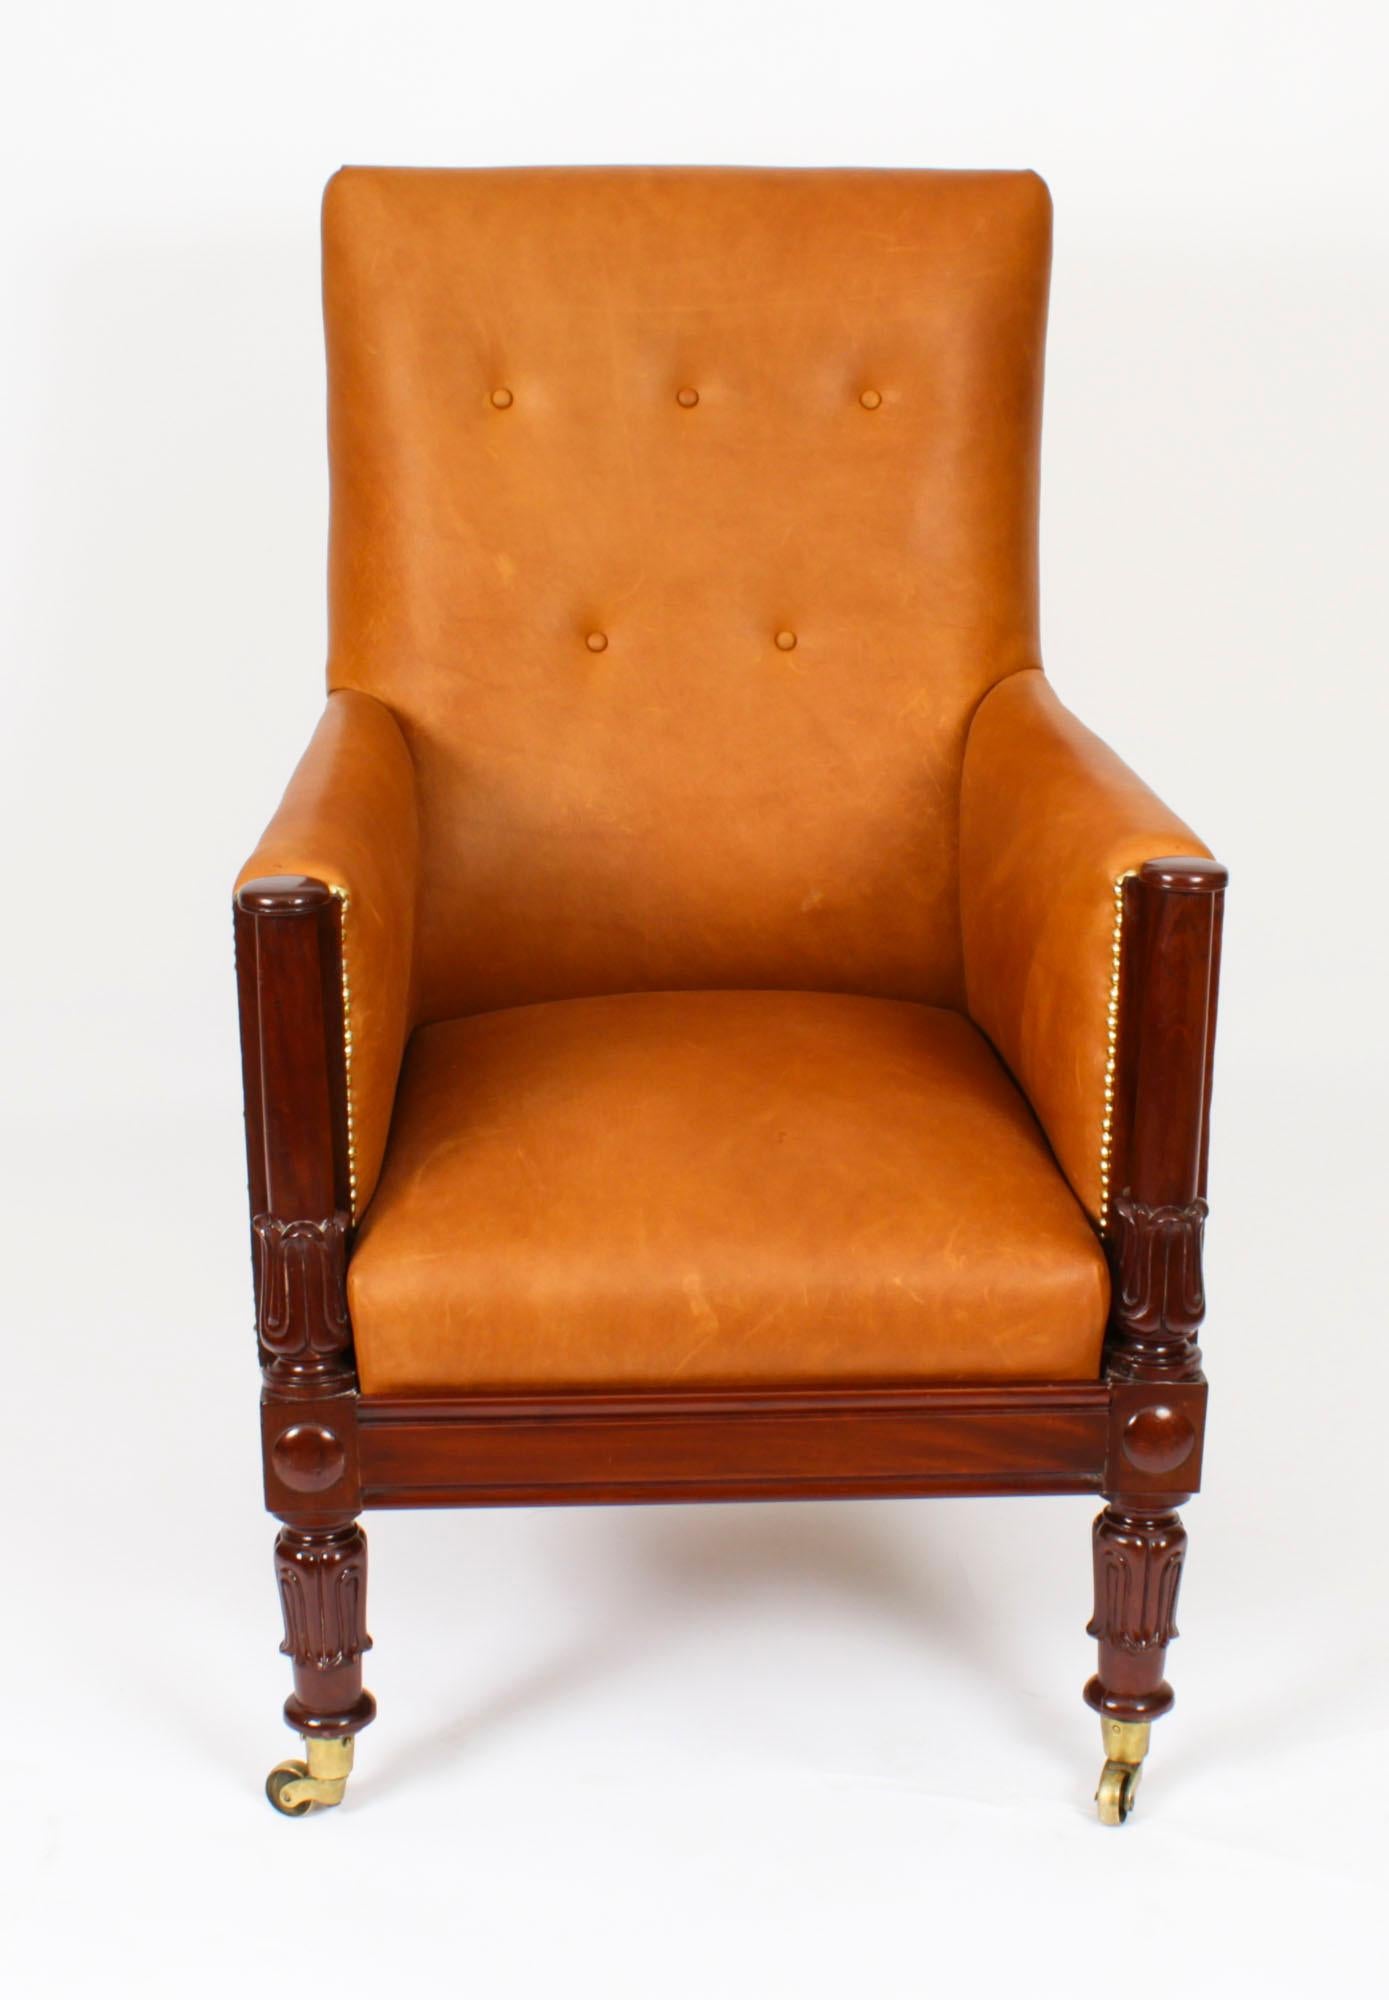 This is a very handsome  antique  Regency library armchair, circa 1830 in date.
This beautiful armchair is  made of solid mahogany and has been reupholstered in a sumptuous Italian tan leather by Moore & Gile. It features a buttoned back, raised